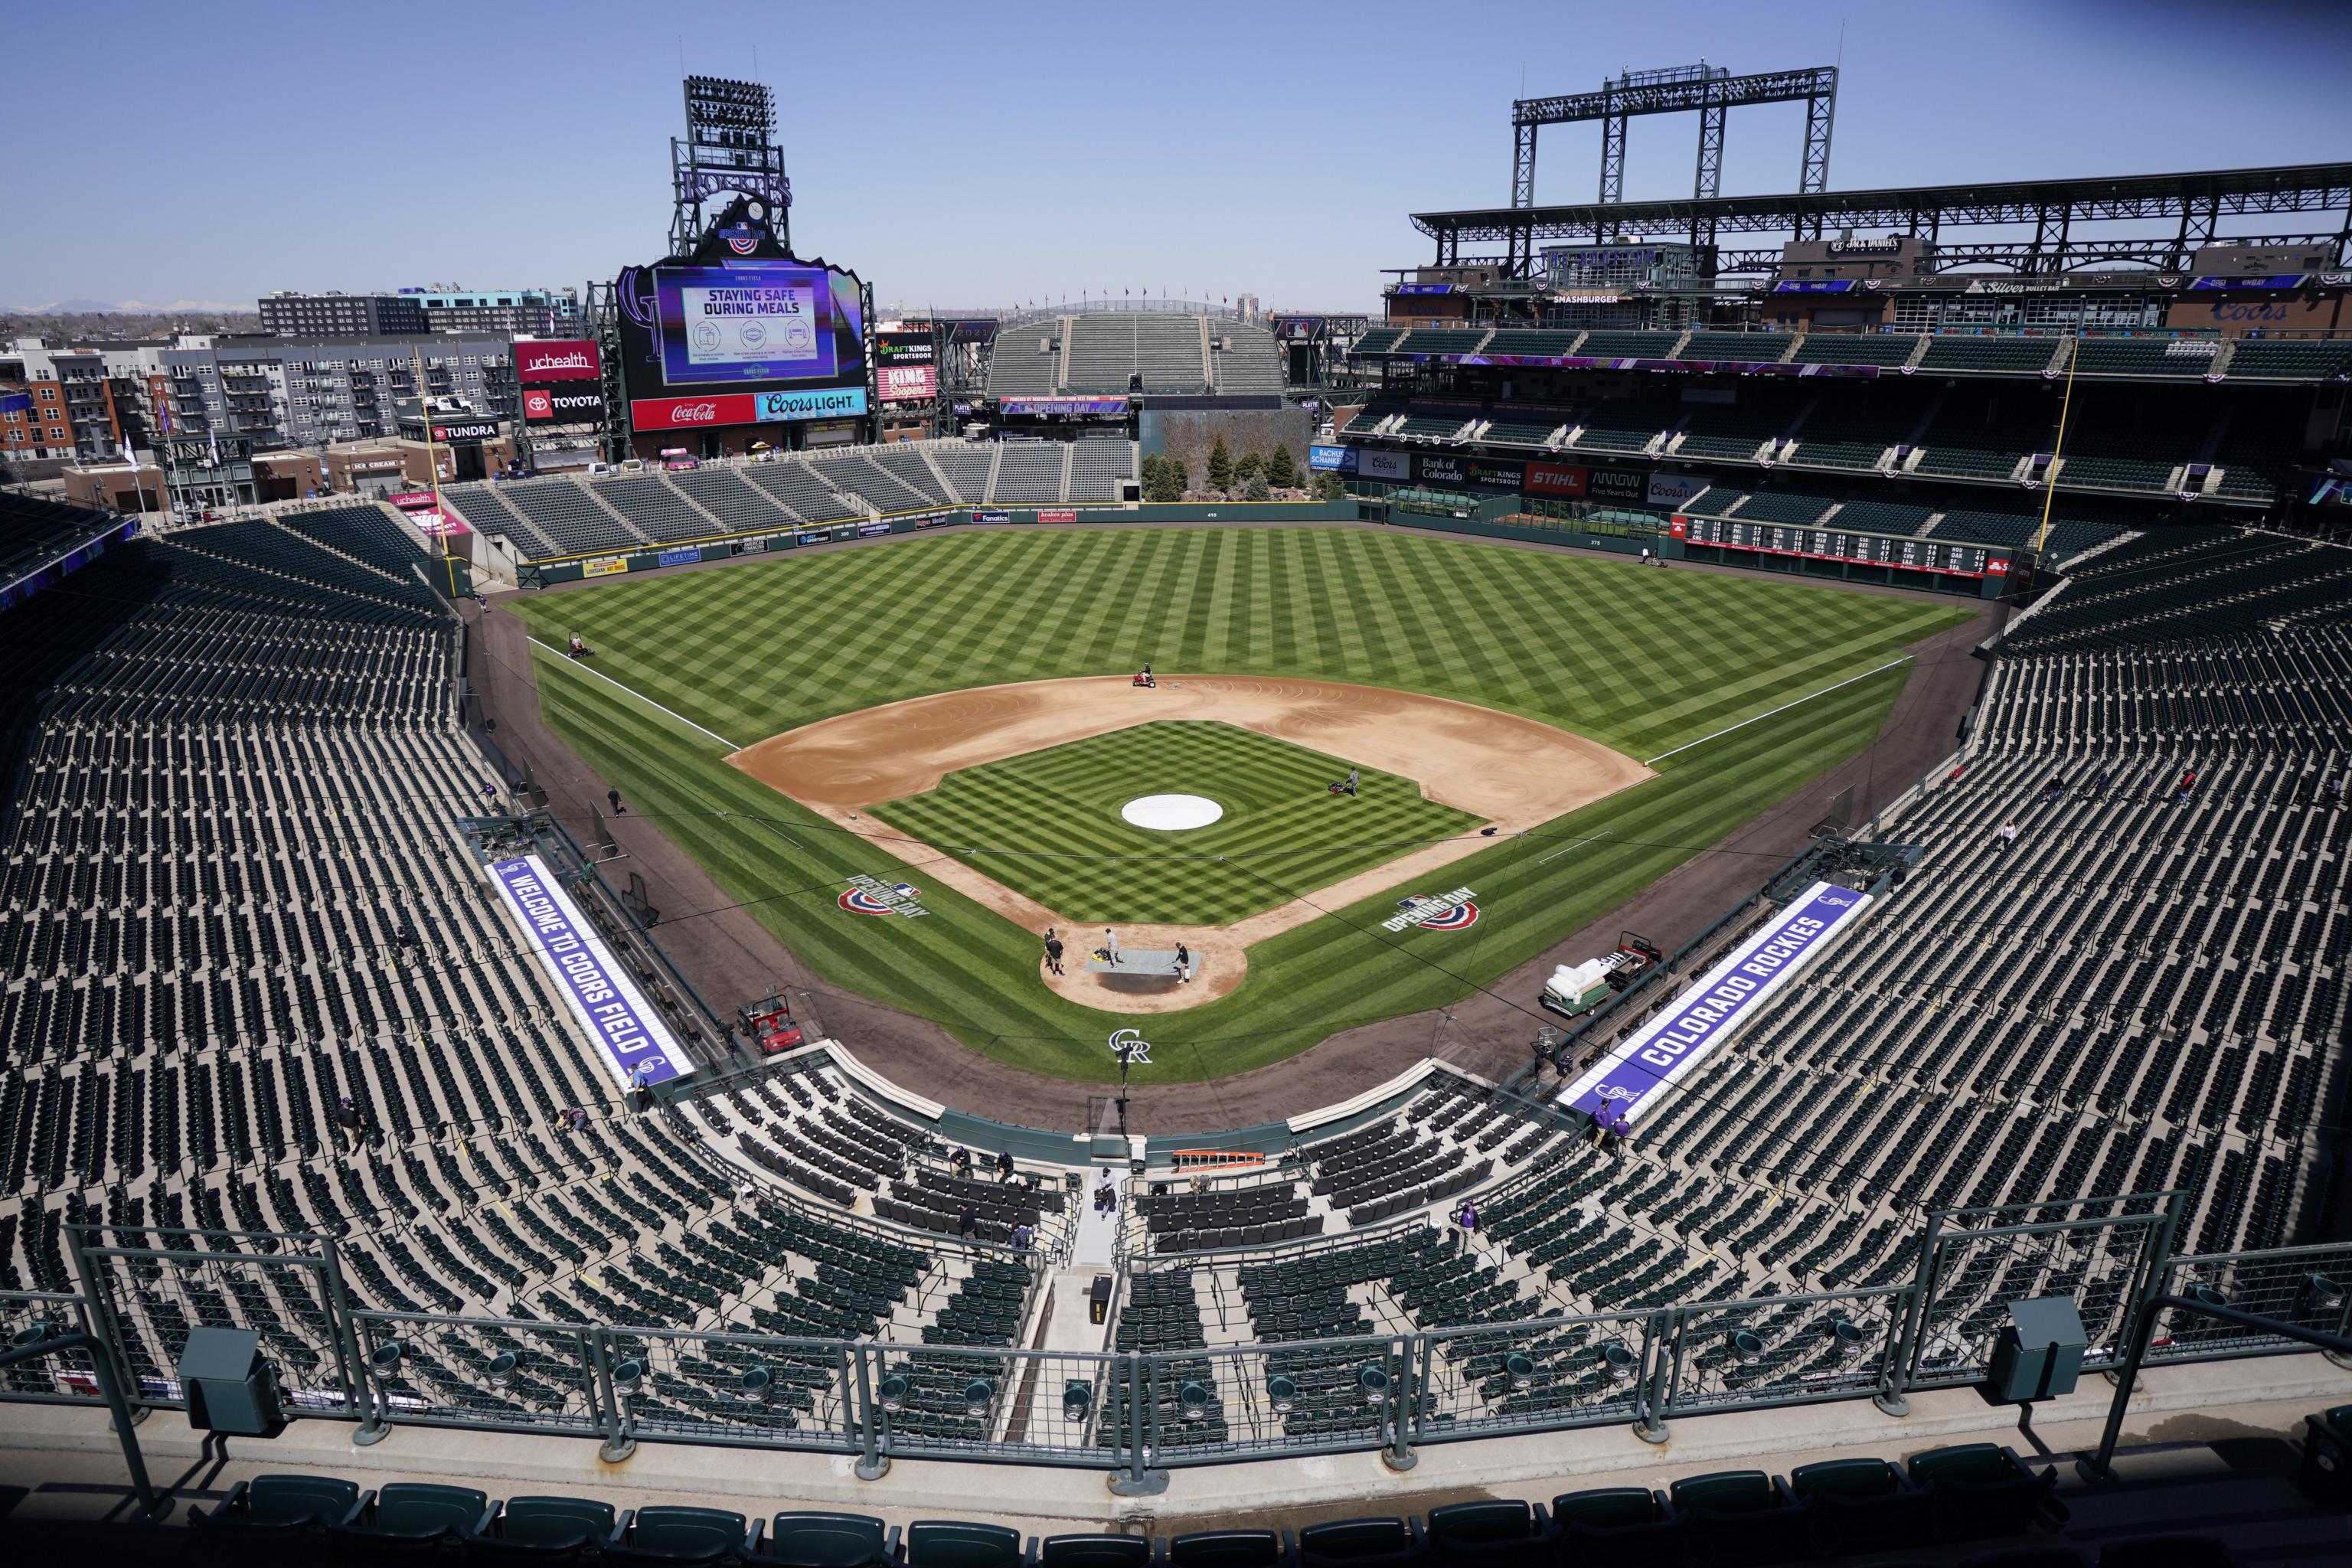 PHOTOS: 2021 MLB All-Star Futures Game at Coors Field